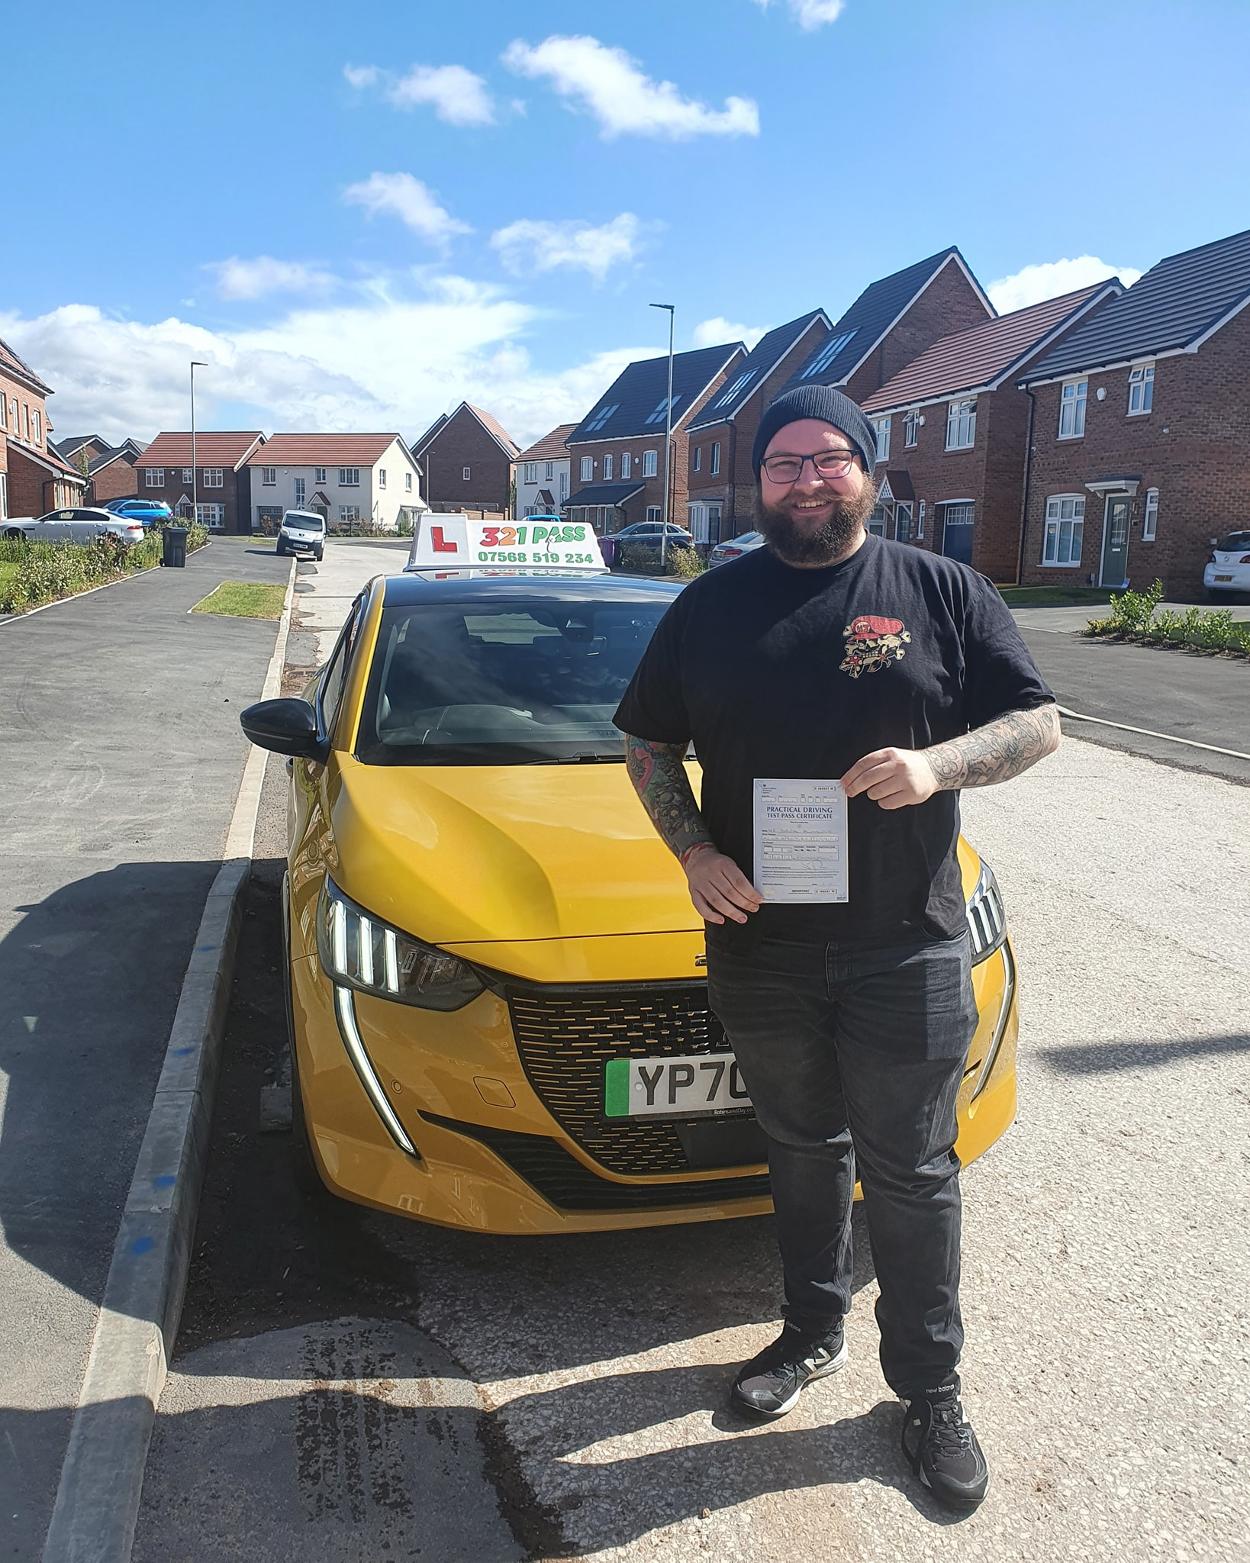 Congratulations Jordan on pass your driving test today at Featherstone it's been a pleasure teaching you all the best for the future keep safe! #automatic #321pass #drivingschool